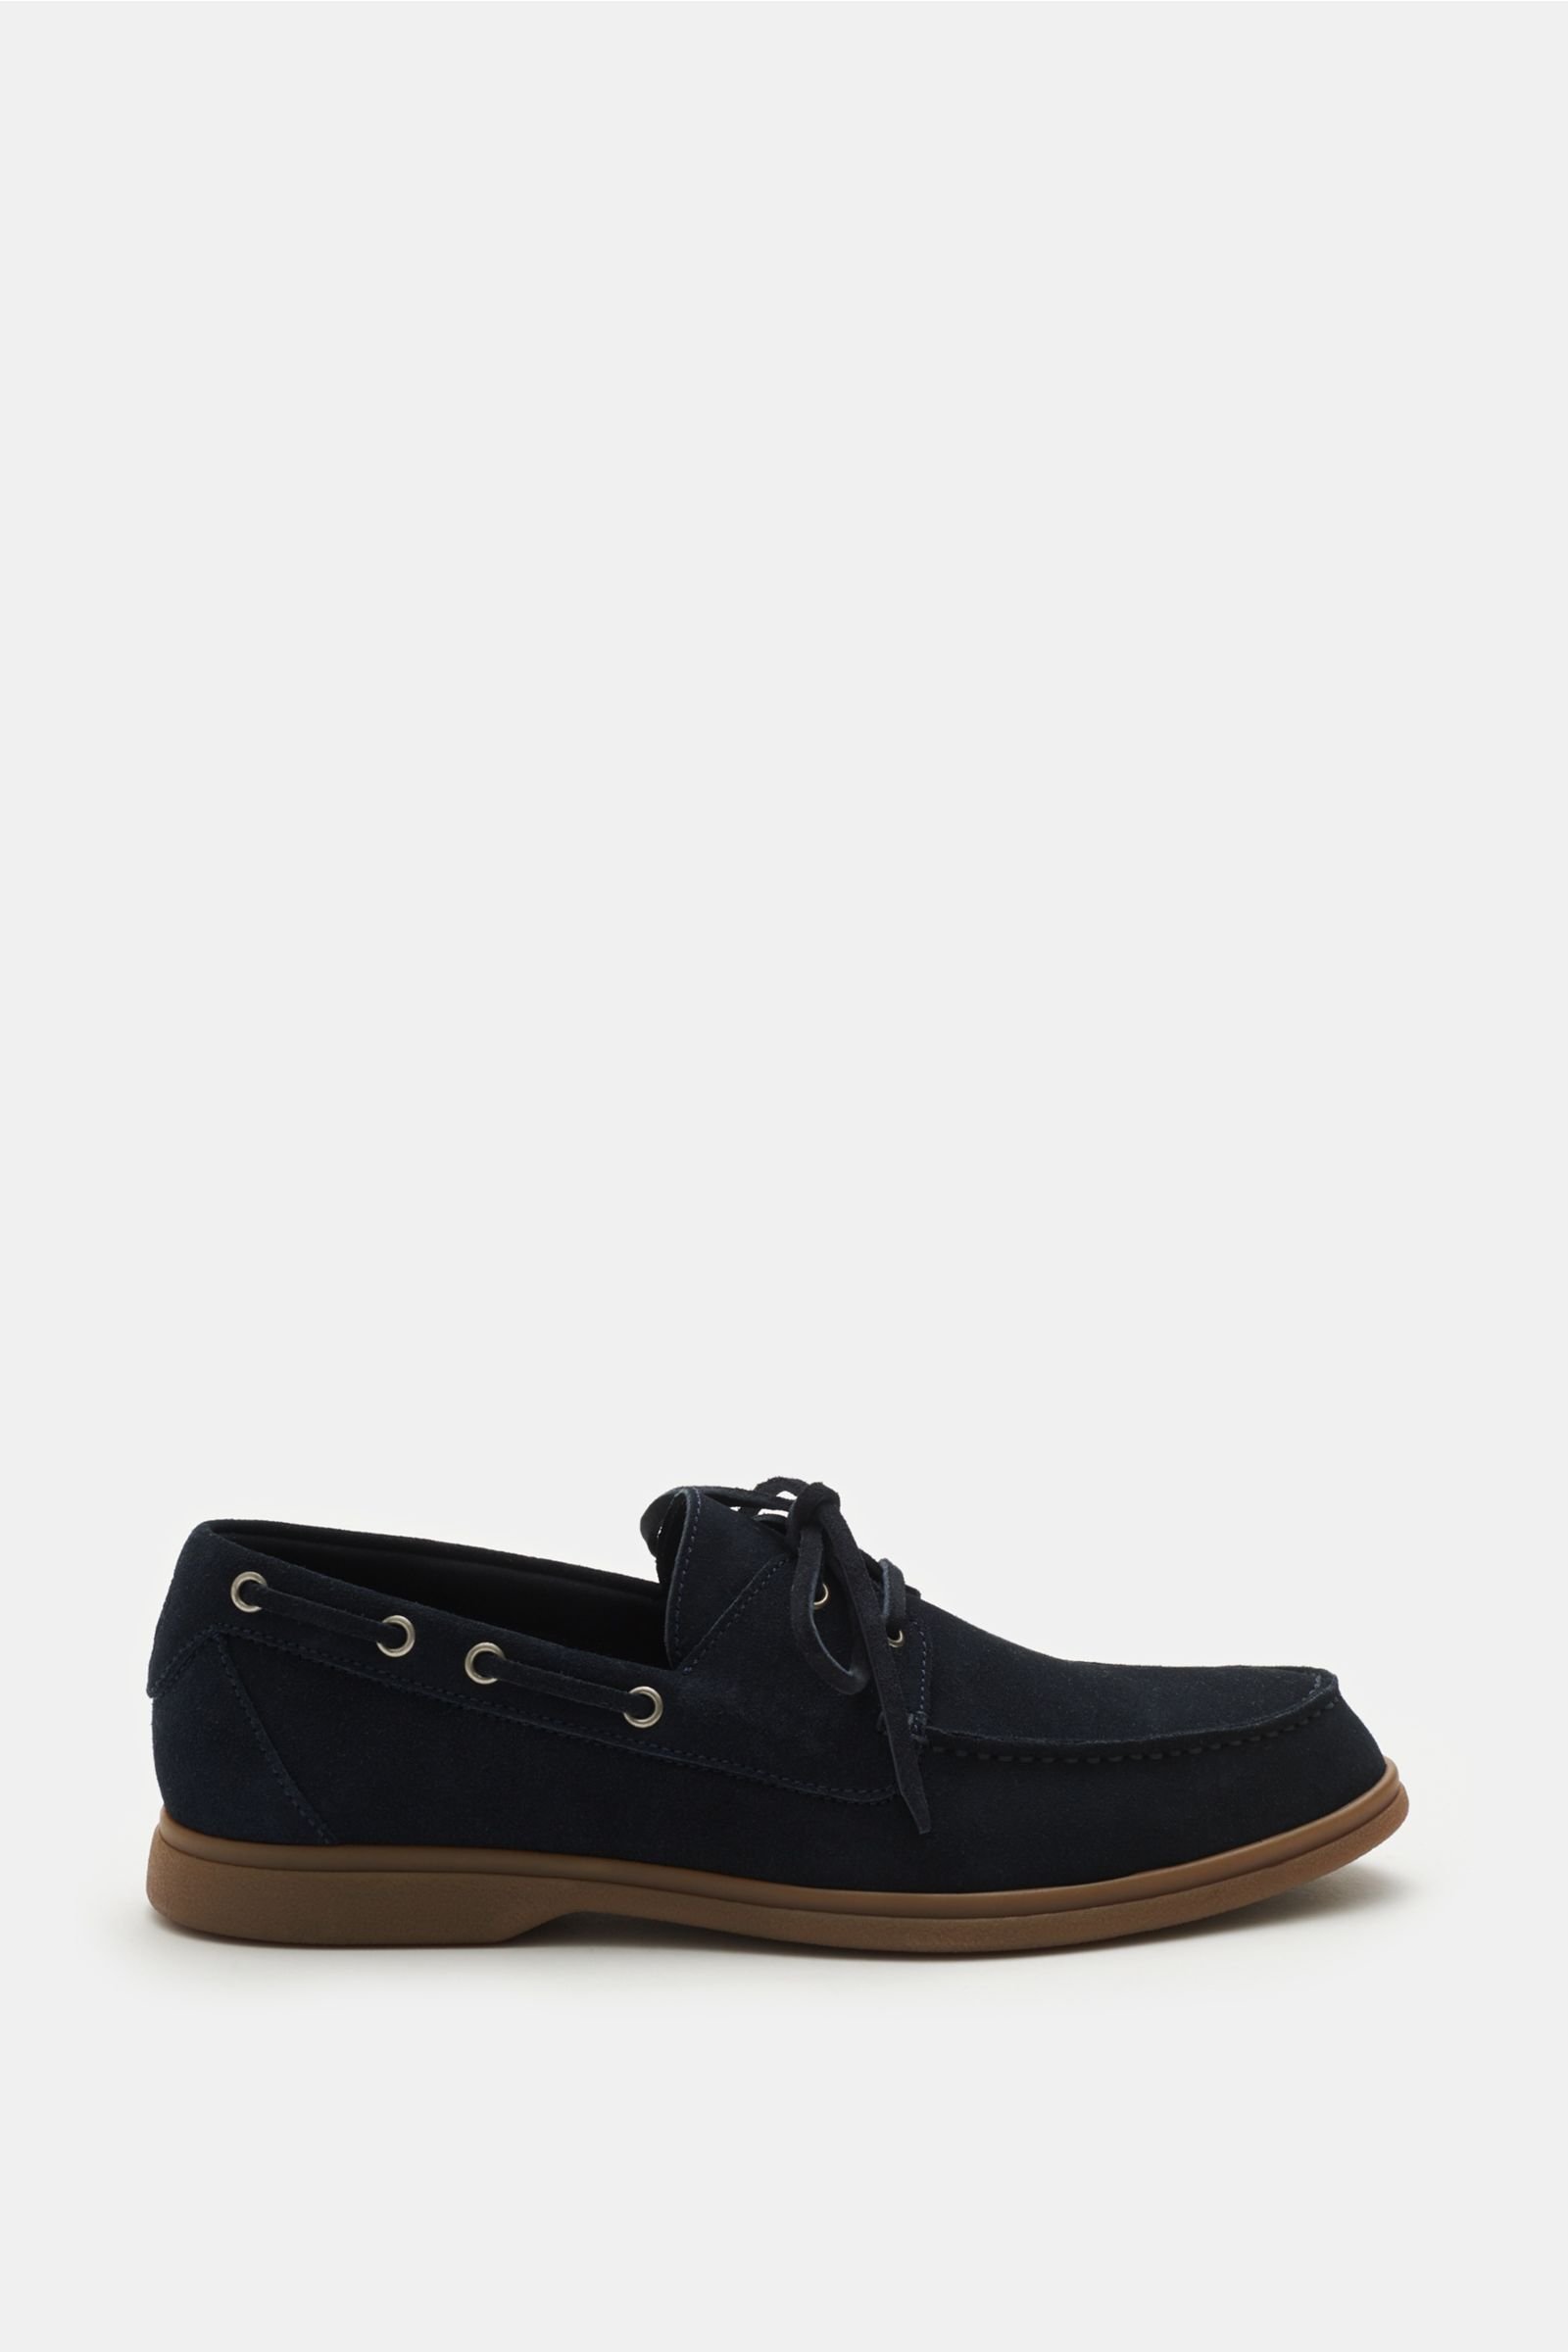 Boat shoes navy